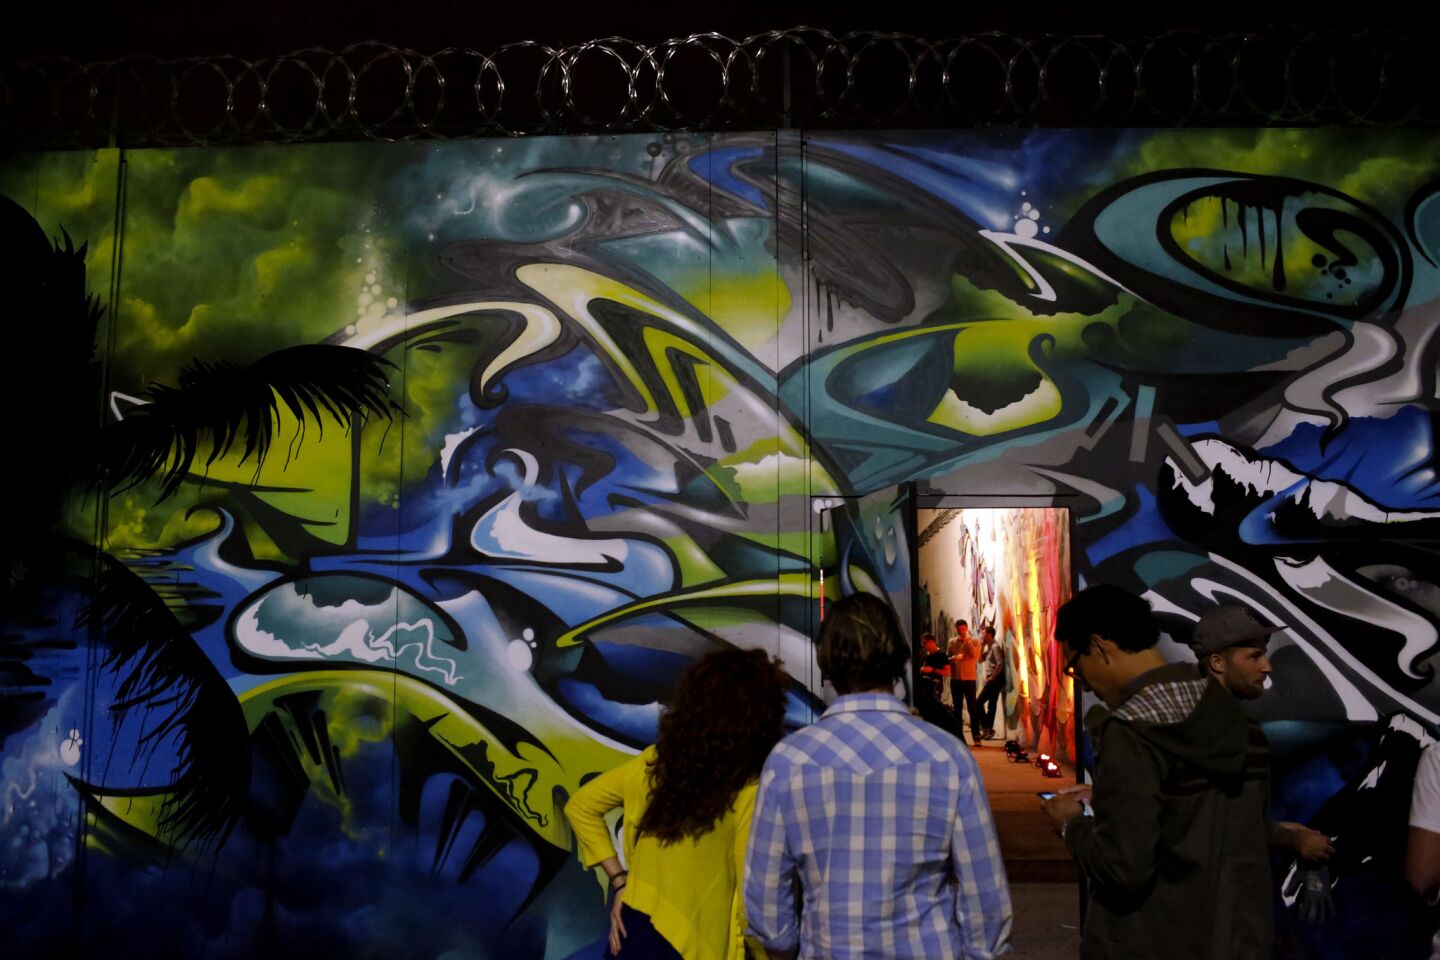 On March 17, Google celebrated the addition of more than 5,000 images to its Google Street Art project with a launch party at the Container Yard in downtown Los Angeles.